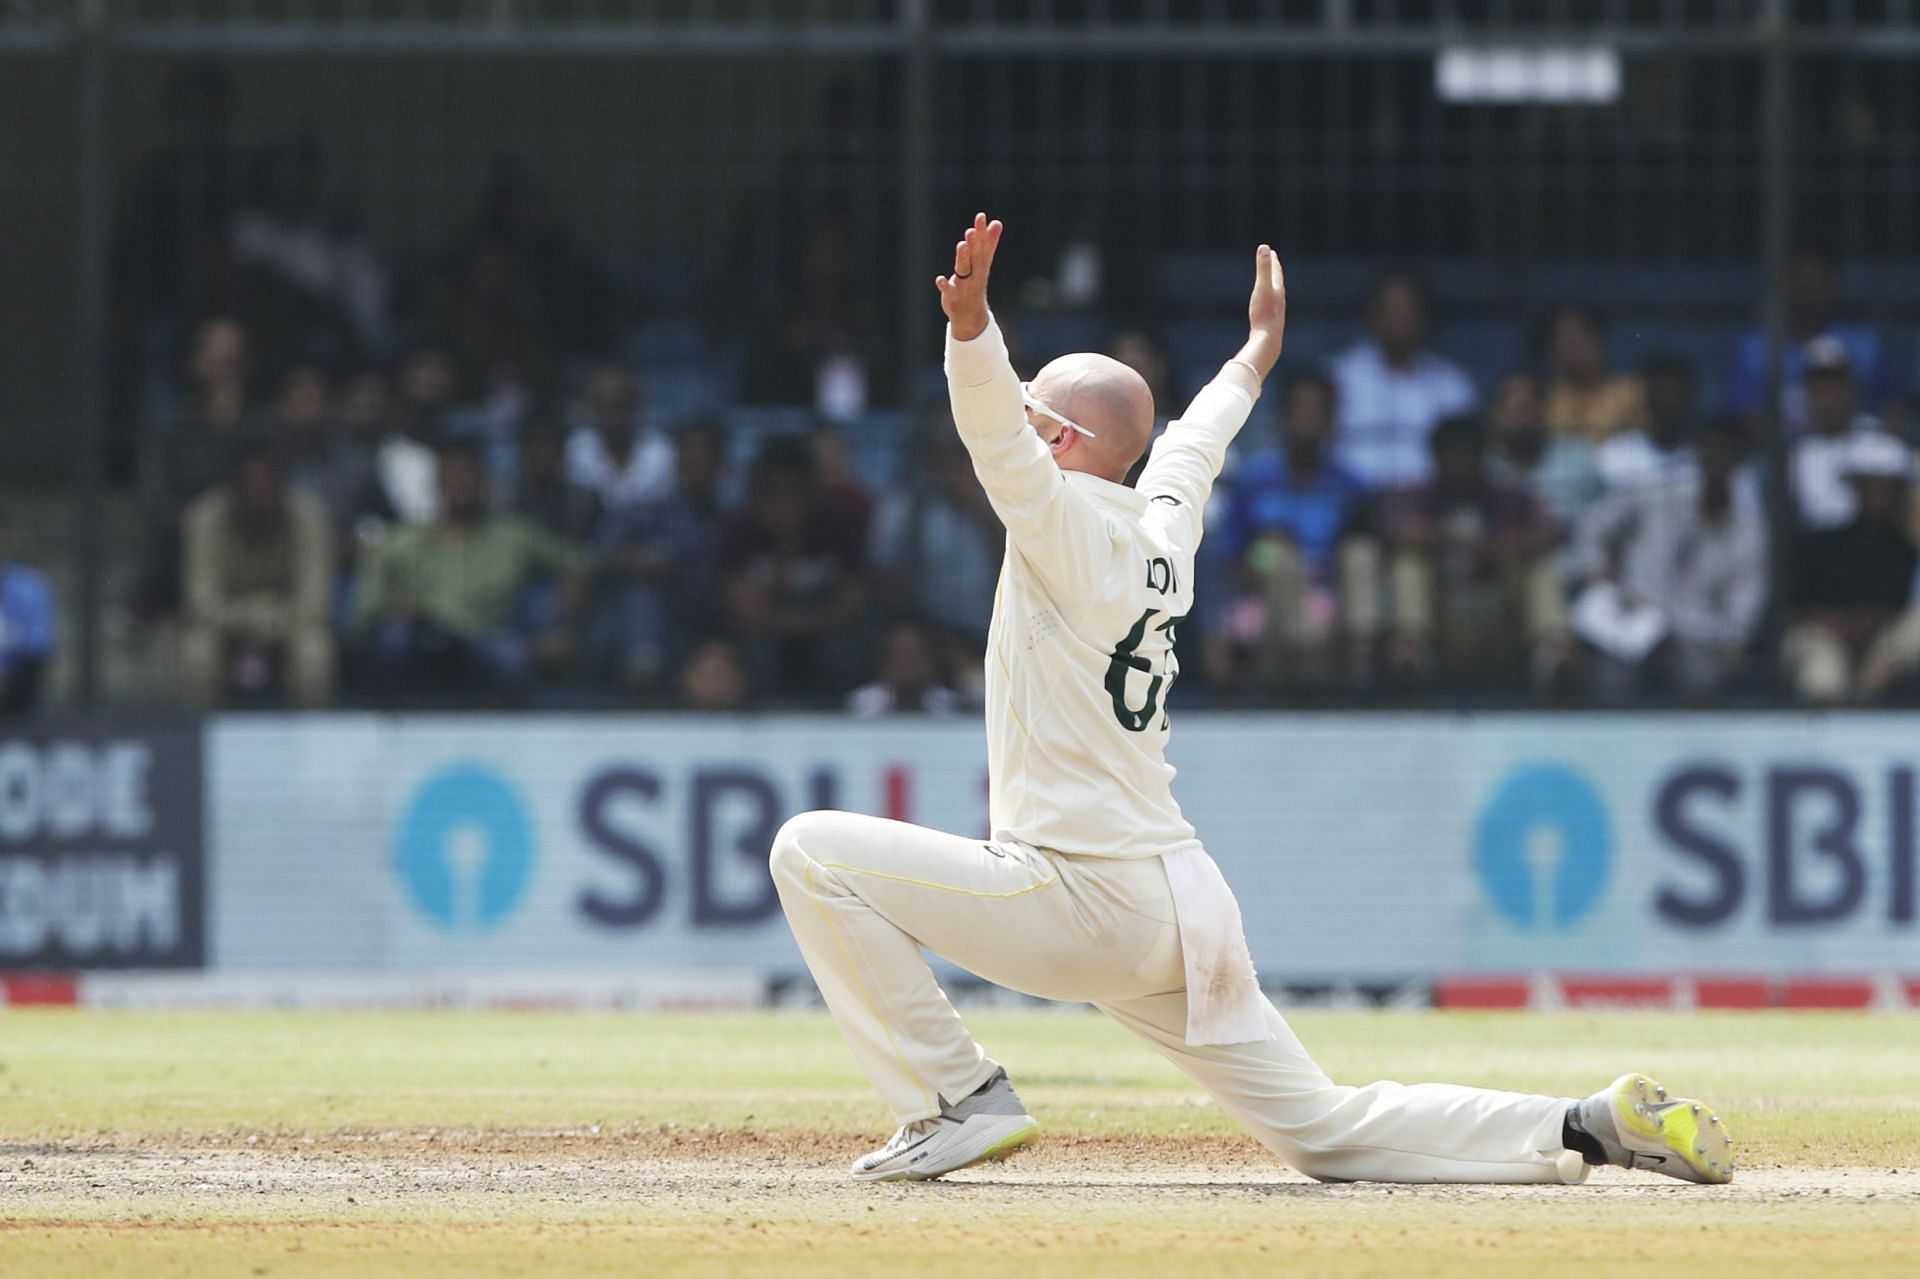 Nathan Lyon picked up 11 wickets in the game. (Credits: Getty)